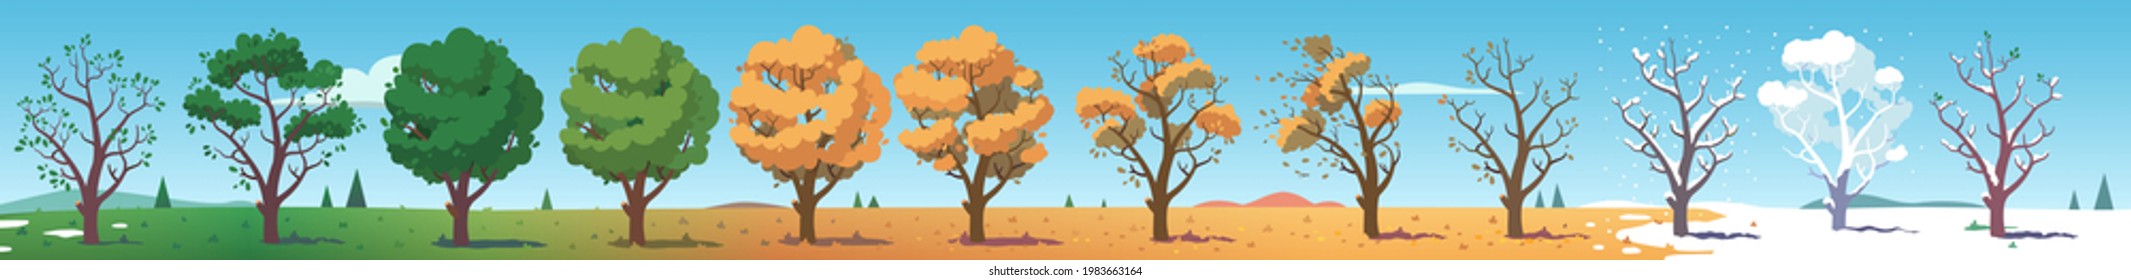 All four seasons tree plant cycle landscape set  Green  yellow foliage leaves crown  bare snow covered branches  Summer  autumn  winter   spring weather flat vector nature illustration design asset